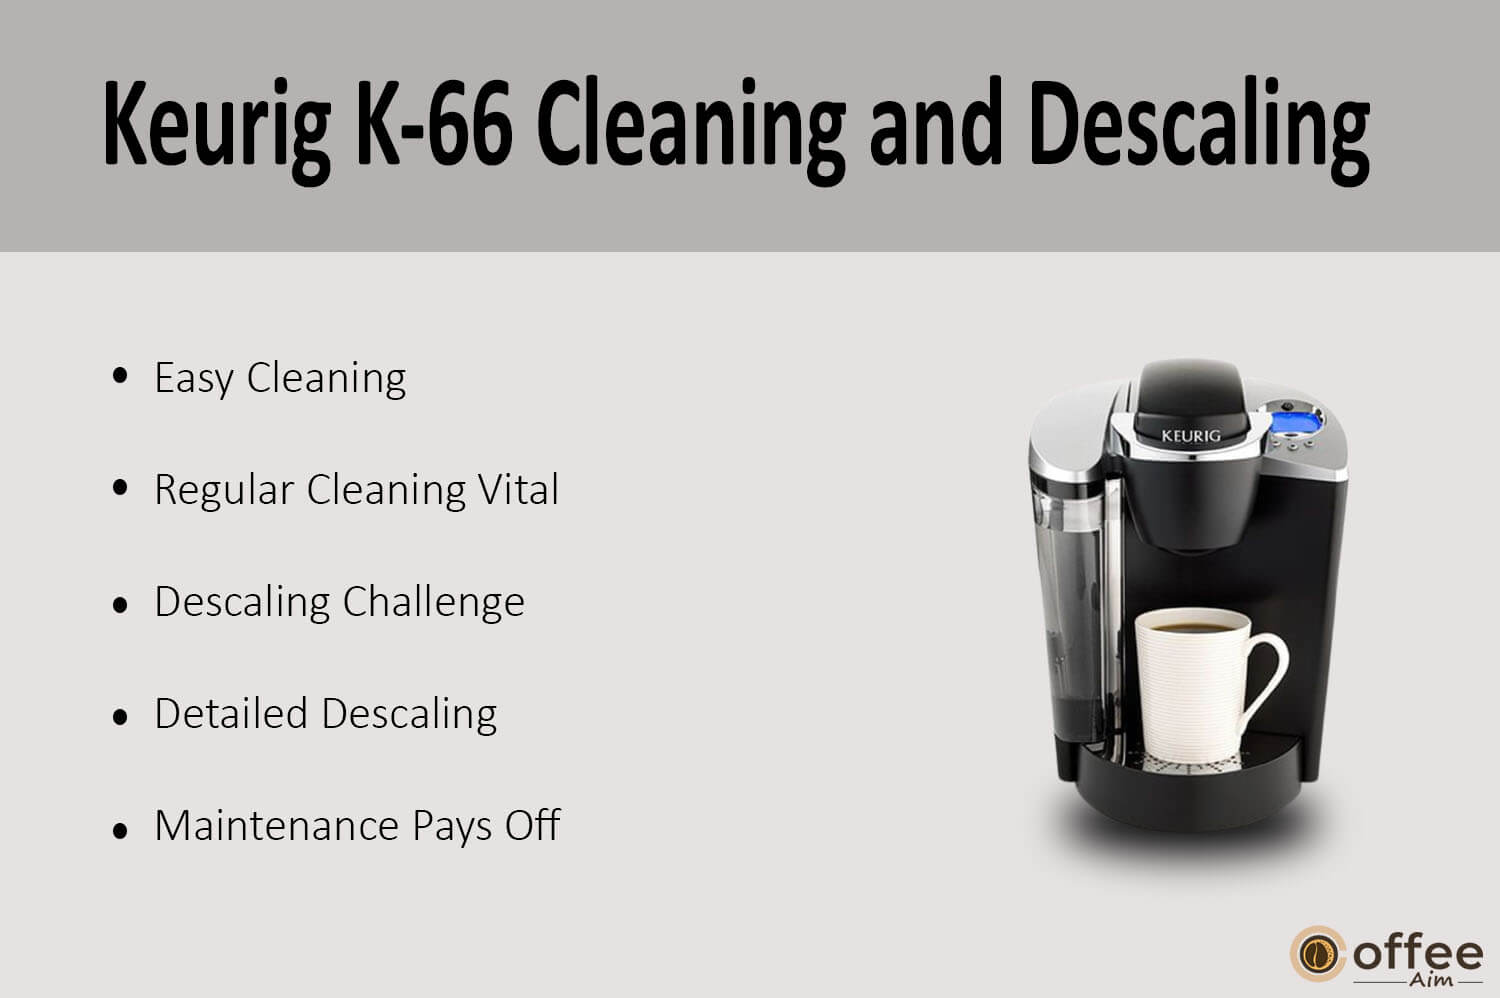 In this image,we explain the Cleaning and descaling.